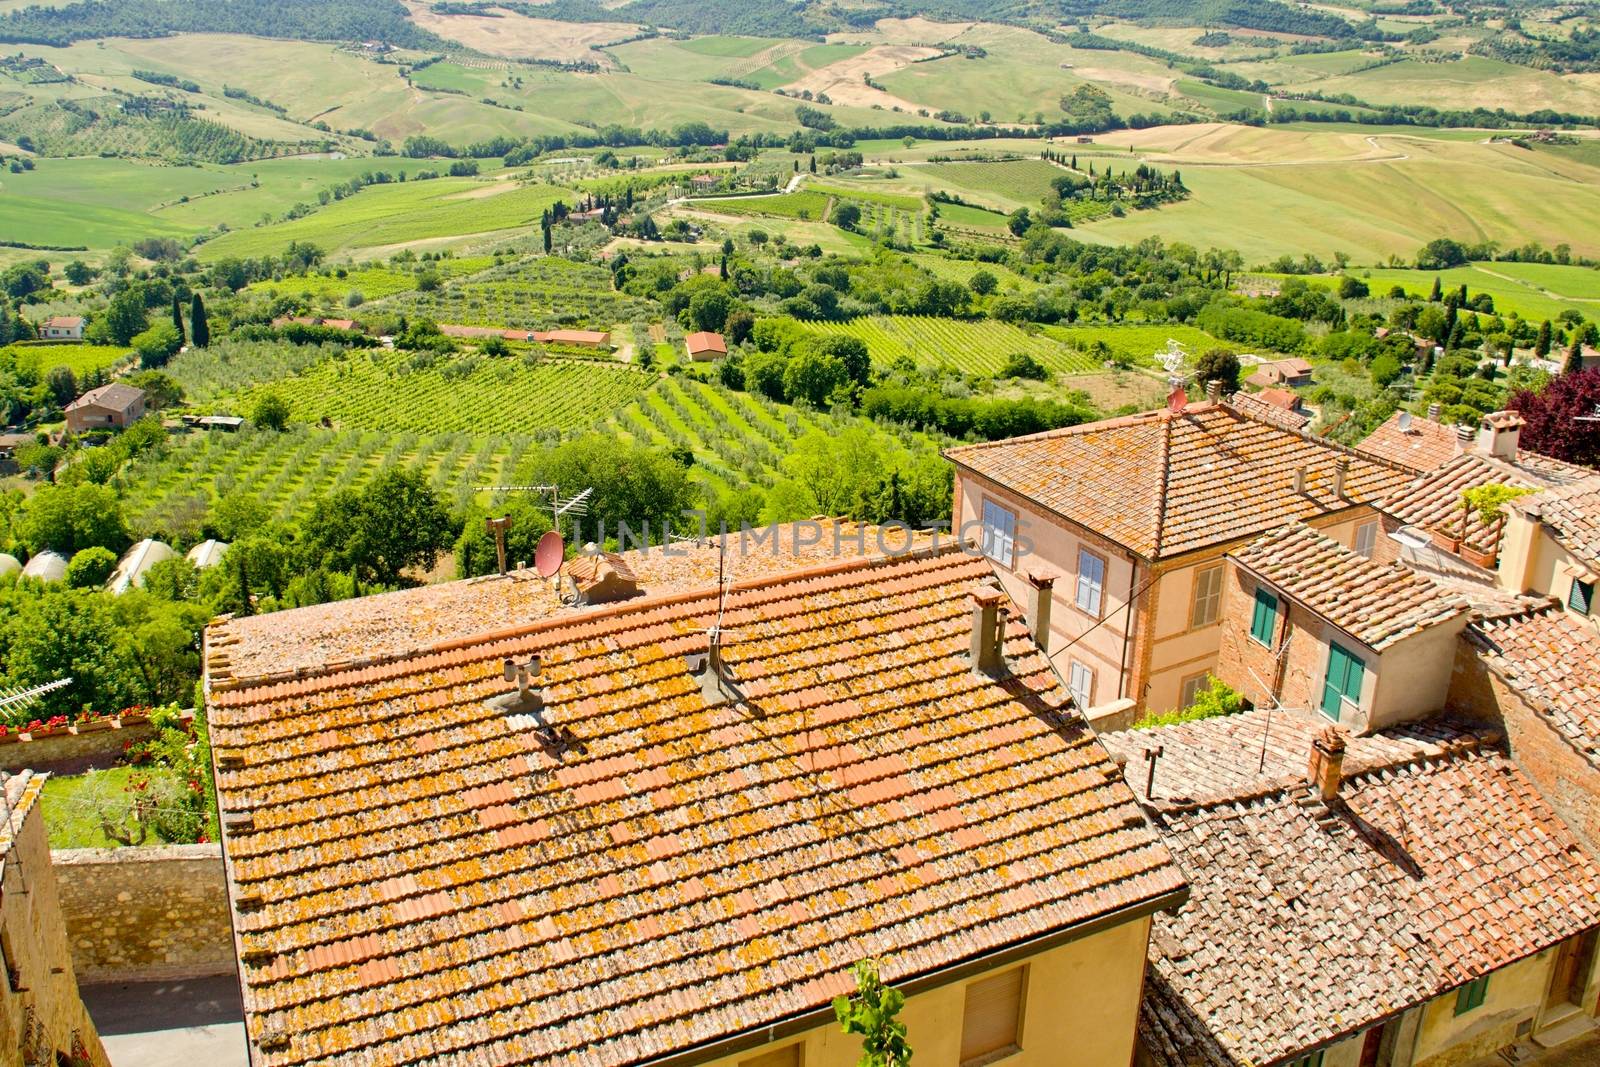 Photo shows a general view of the Tuscany city of Cortona.